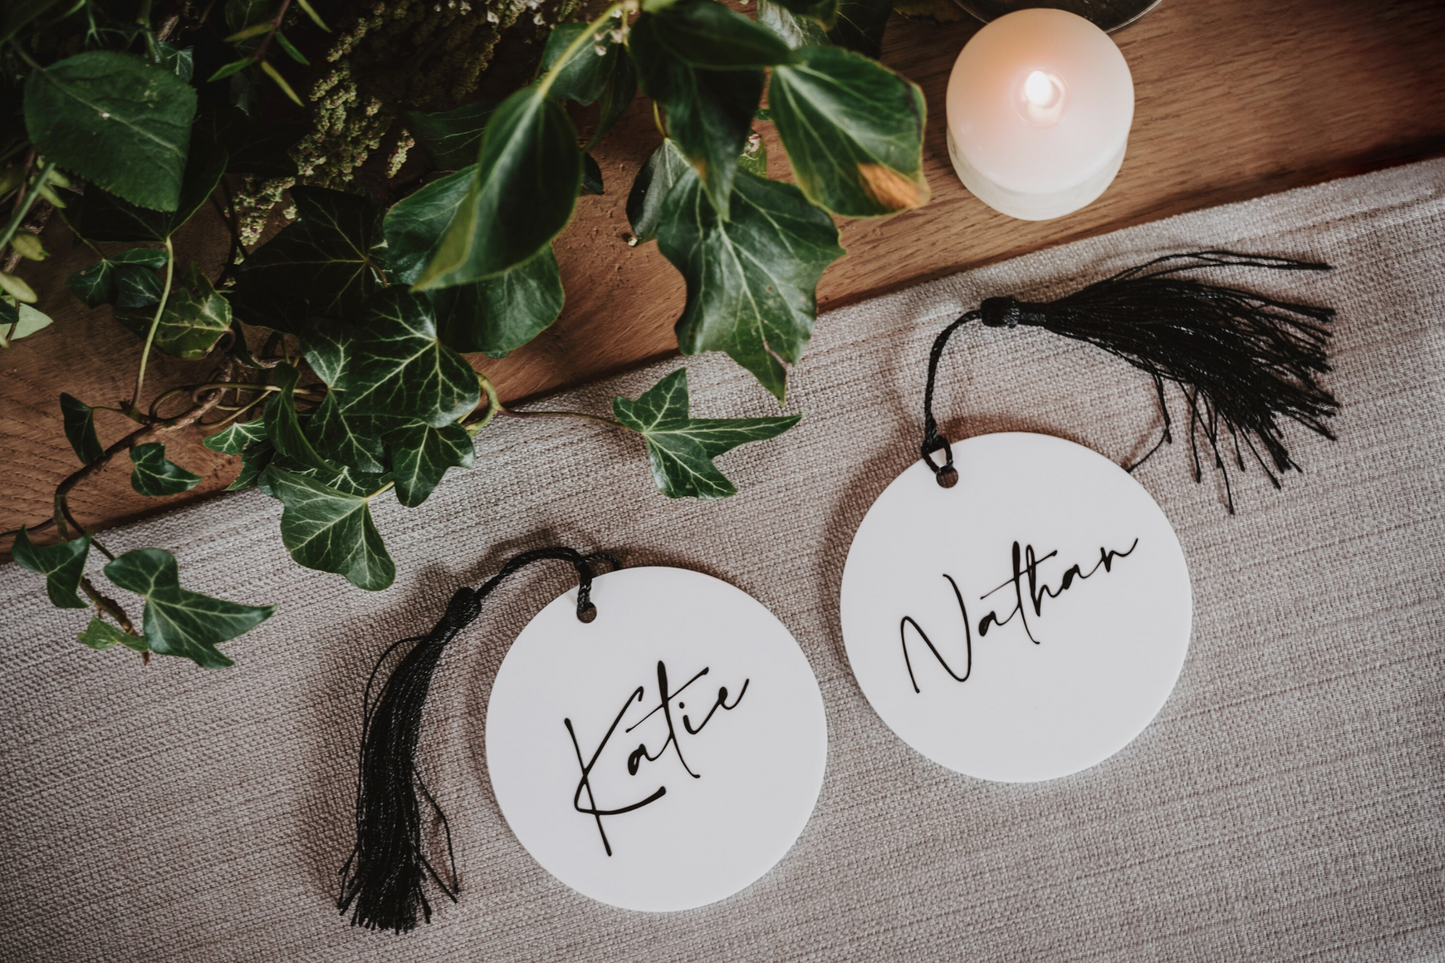 Acrylic Wedding Place Names with tassels